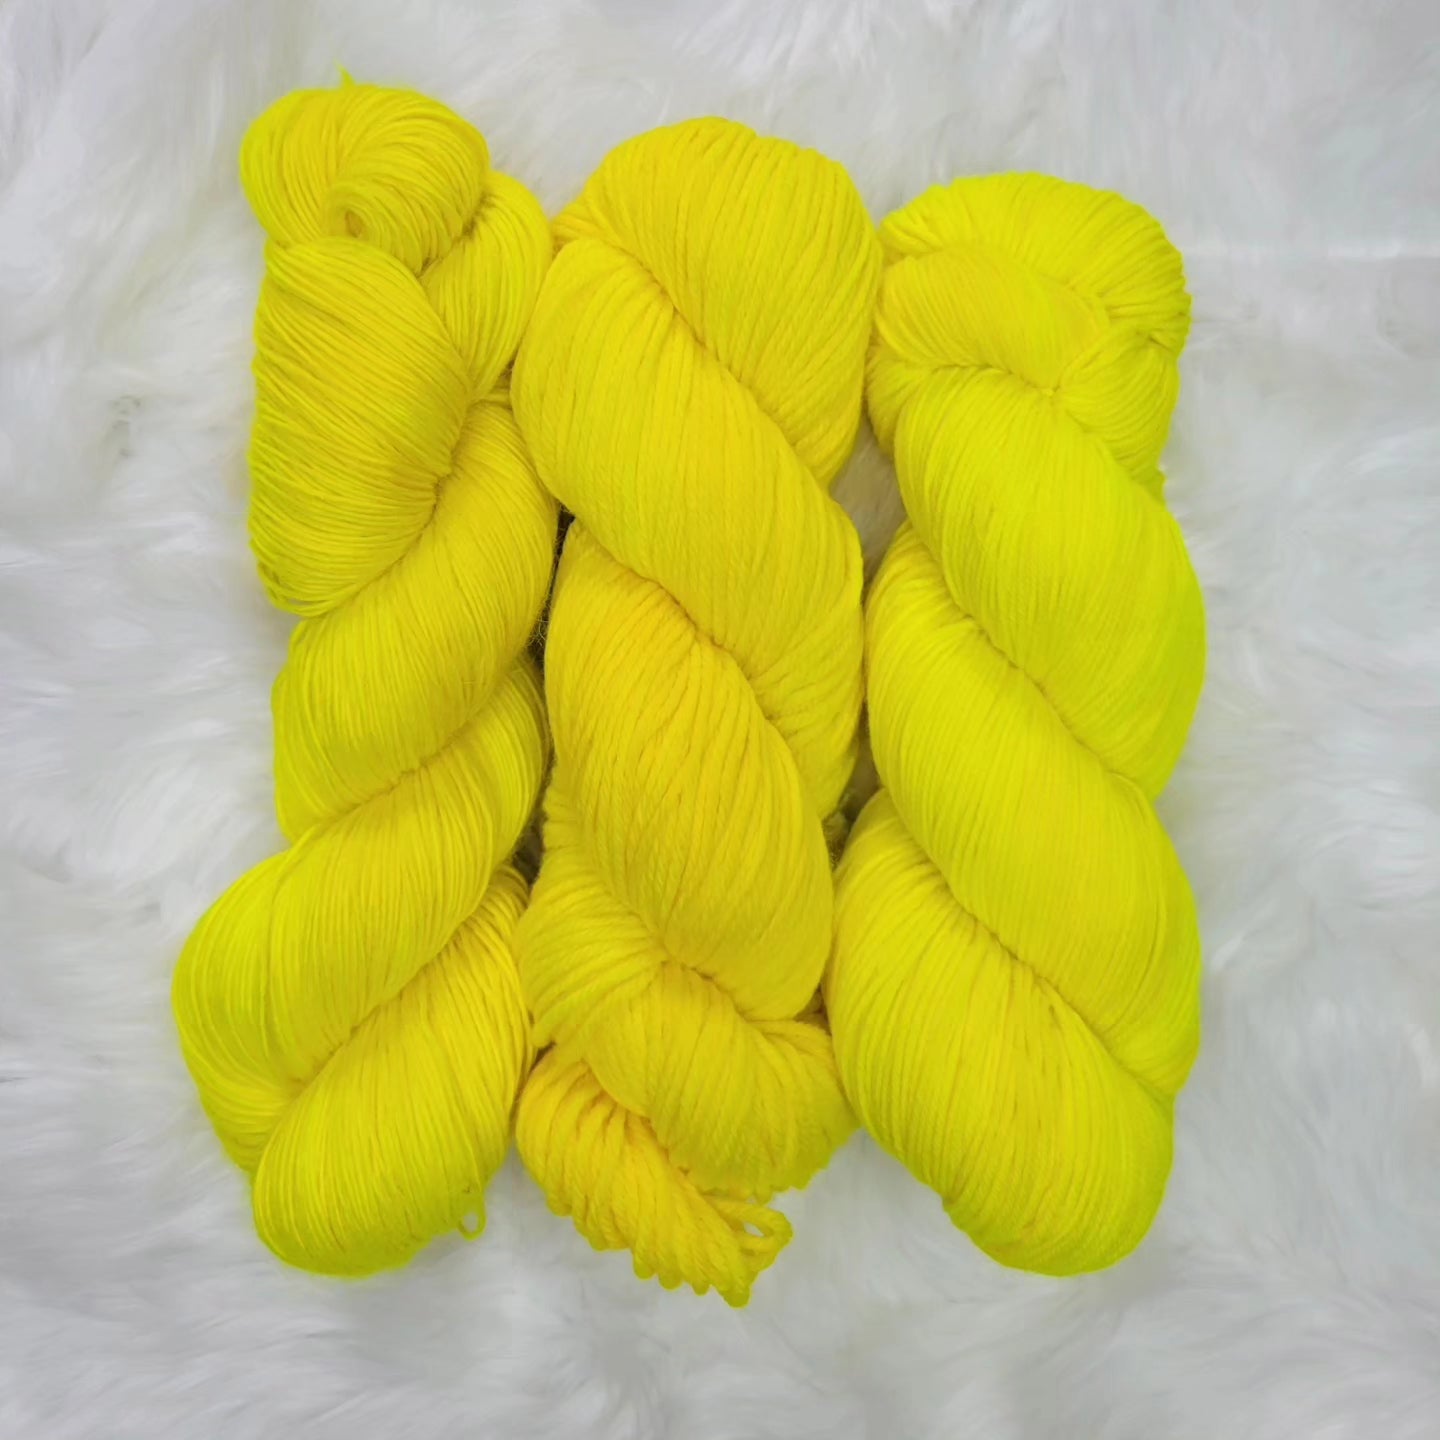 PRE-ORDER Hand Dyed Yarn - Summer Neons Collection